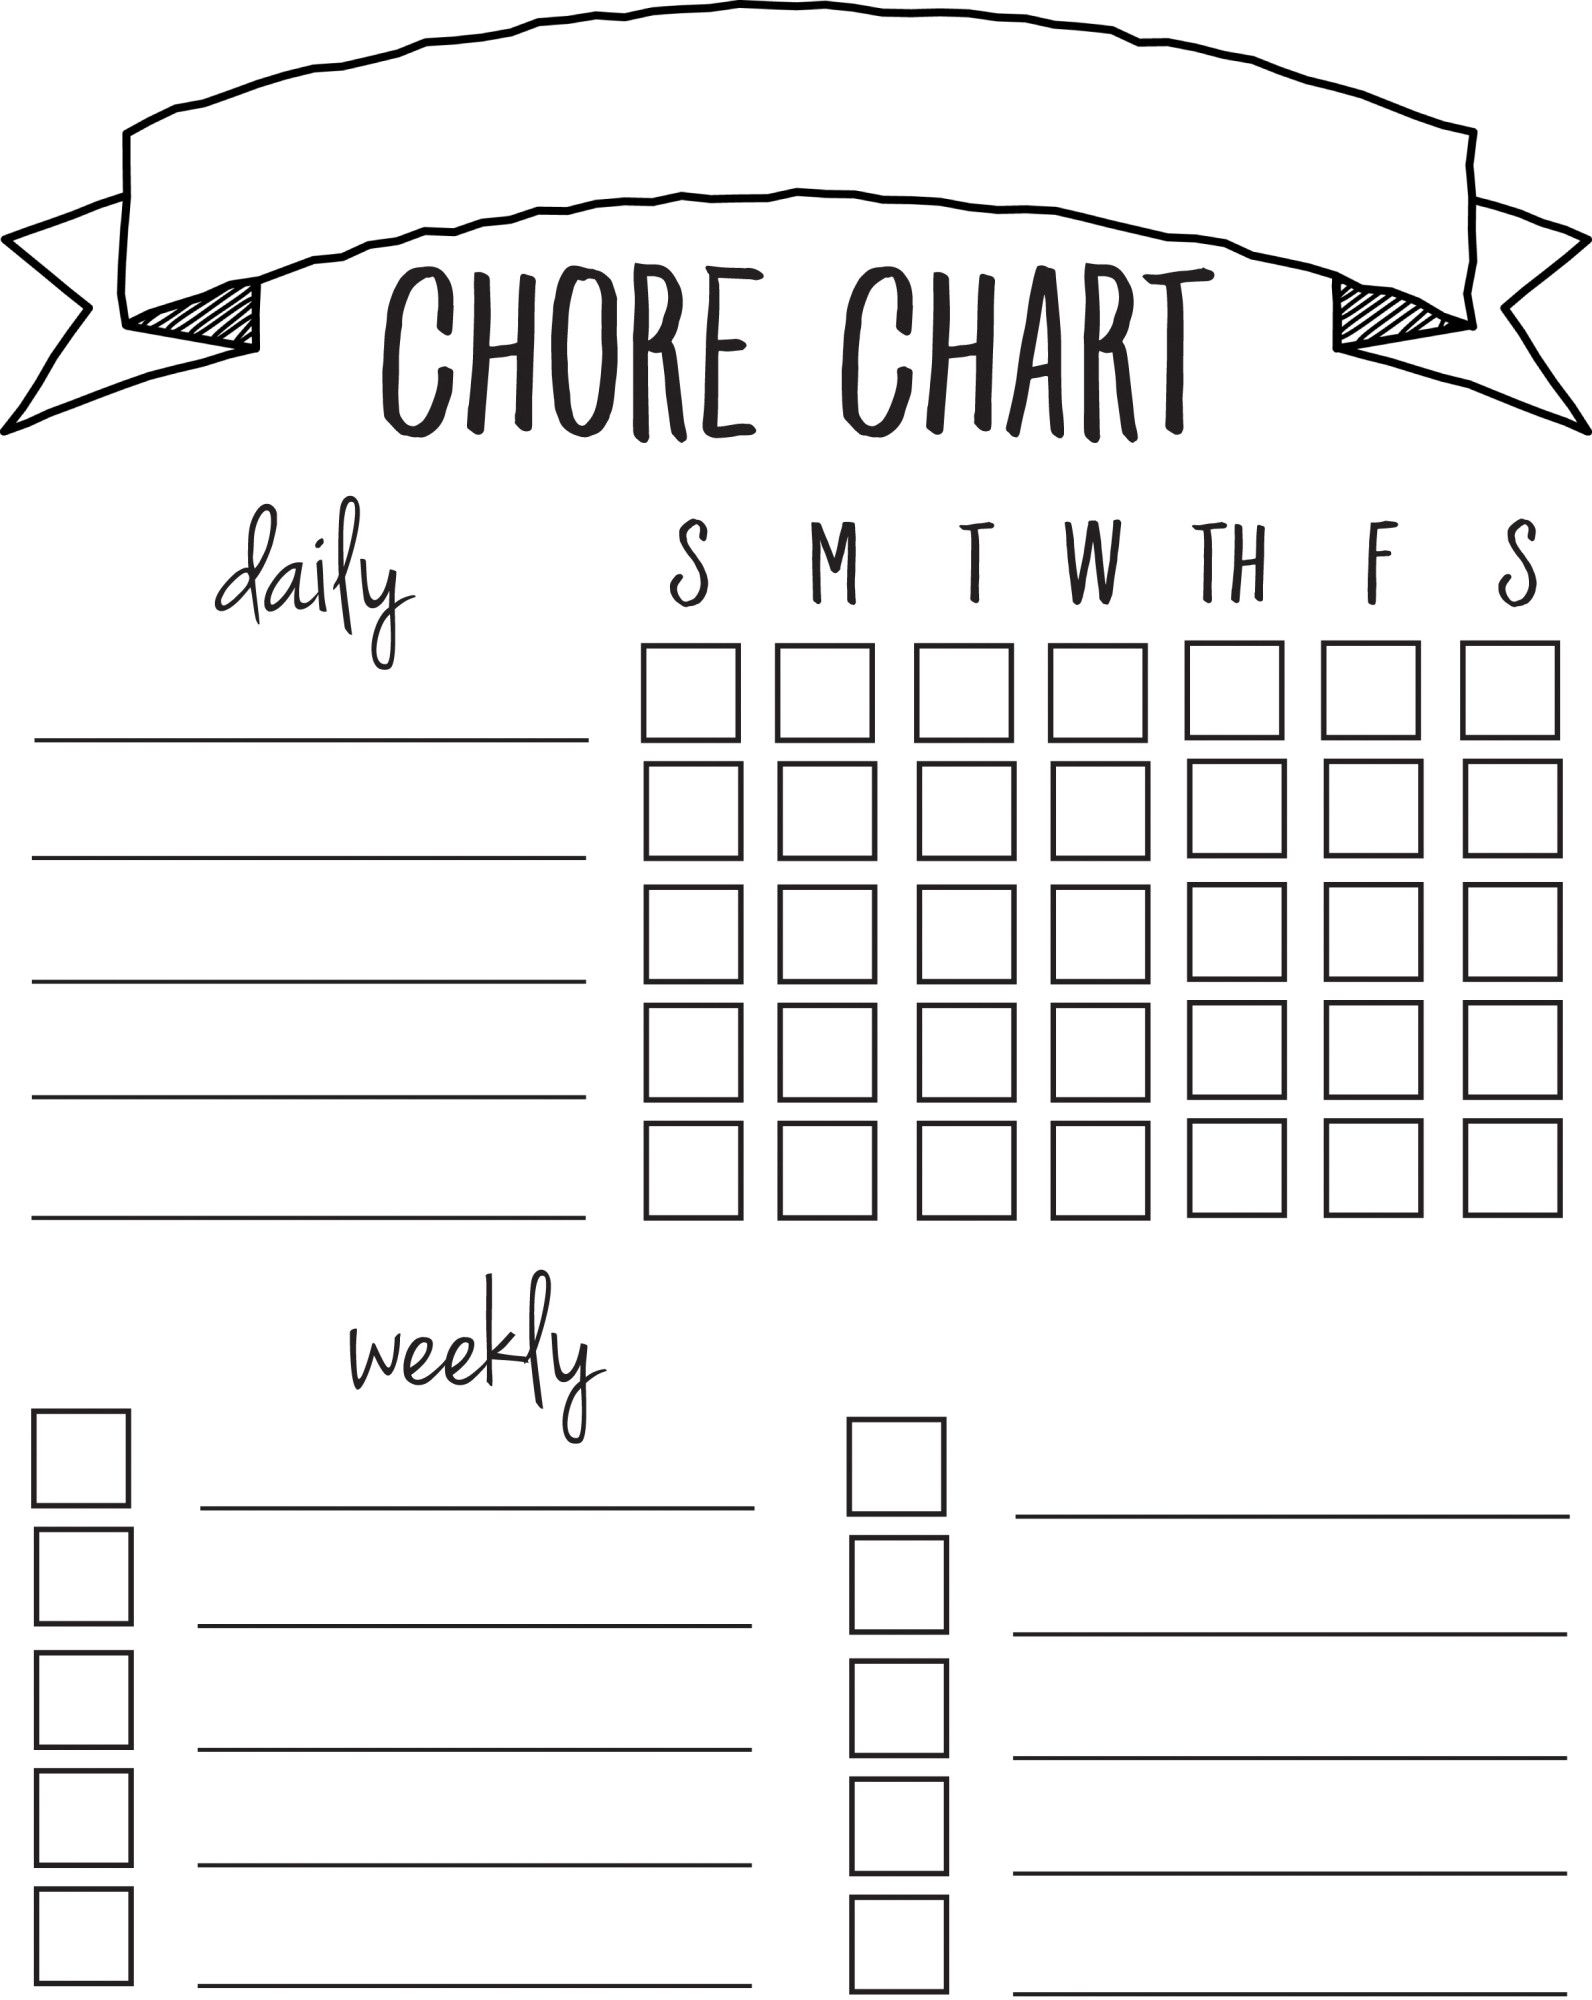 Printable Chore Chart Sincerely Sara D Home Decor DIY Projects Chore Chart Kids Chore Chart Template Printable Chore Chart - Free Printable Chore List